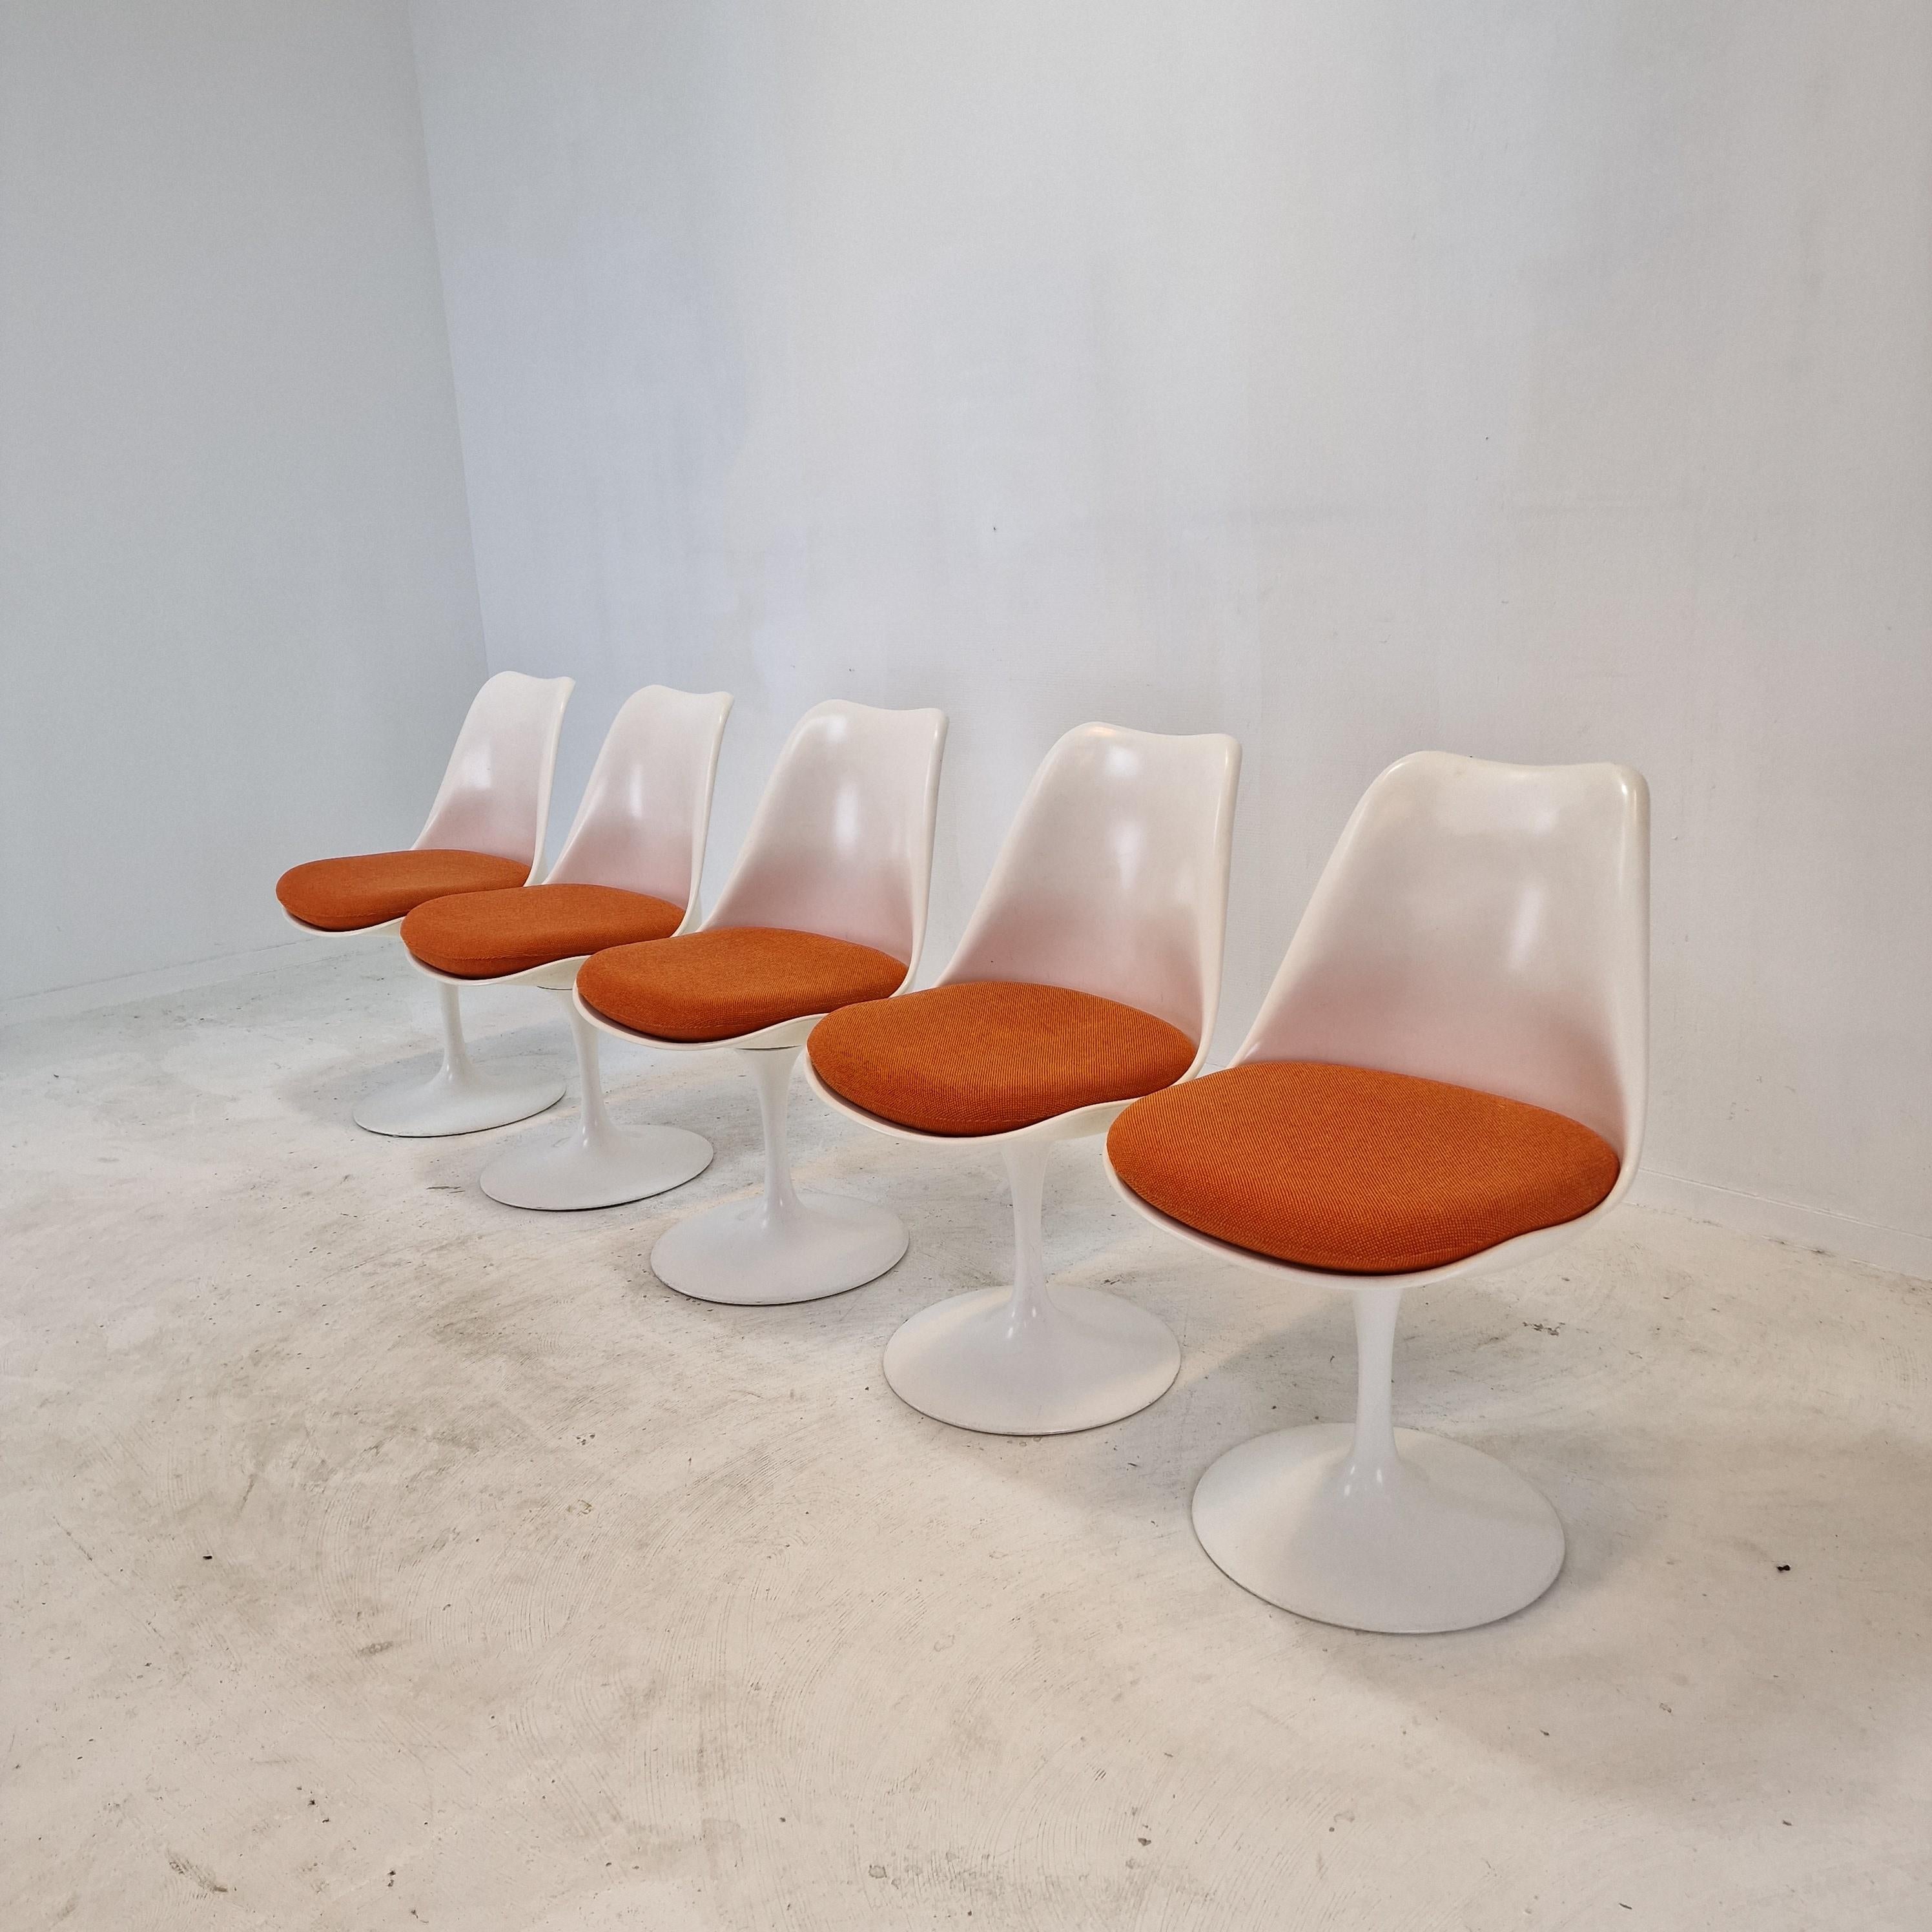 Knoll Marble Dining Table With 5 Chairs by Eero Saarinen, 1960s For Sale 6